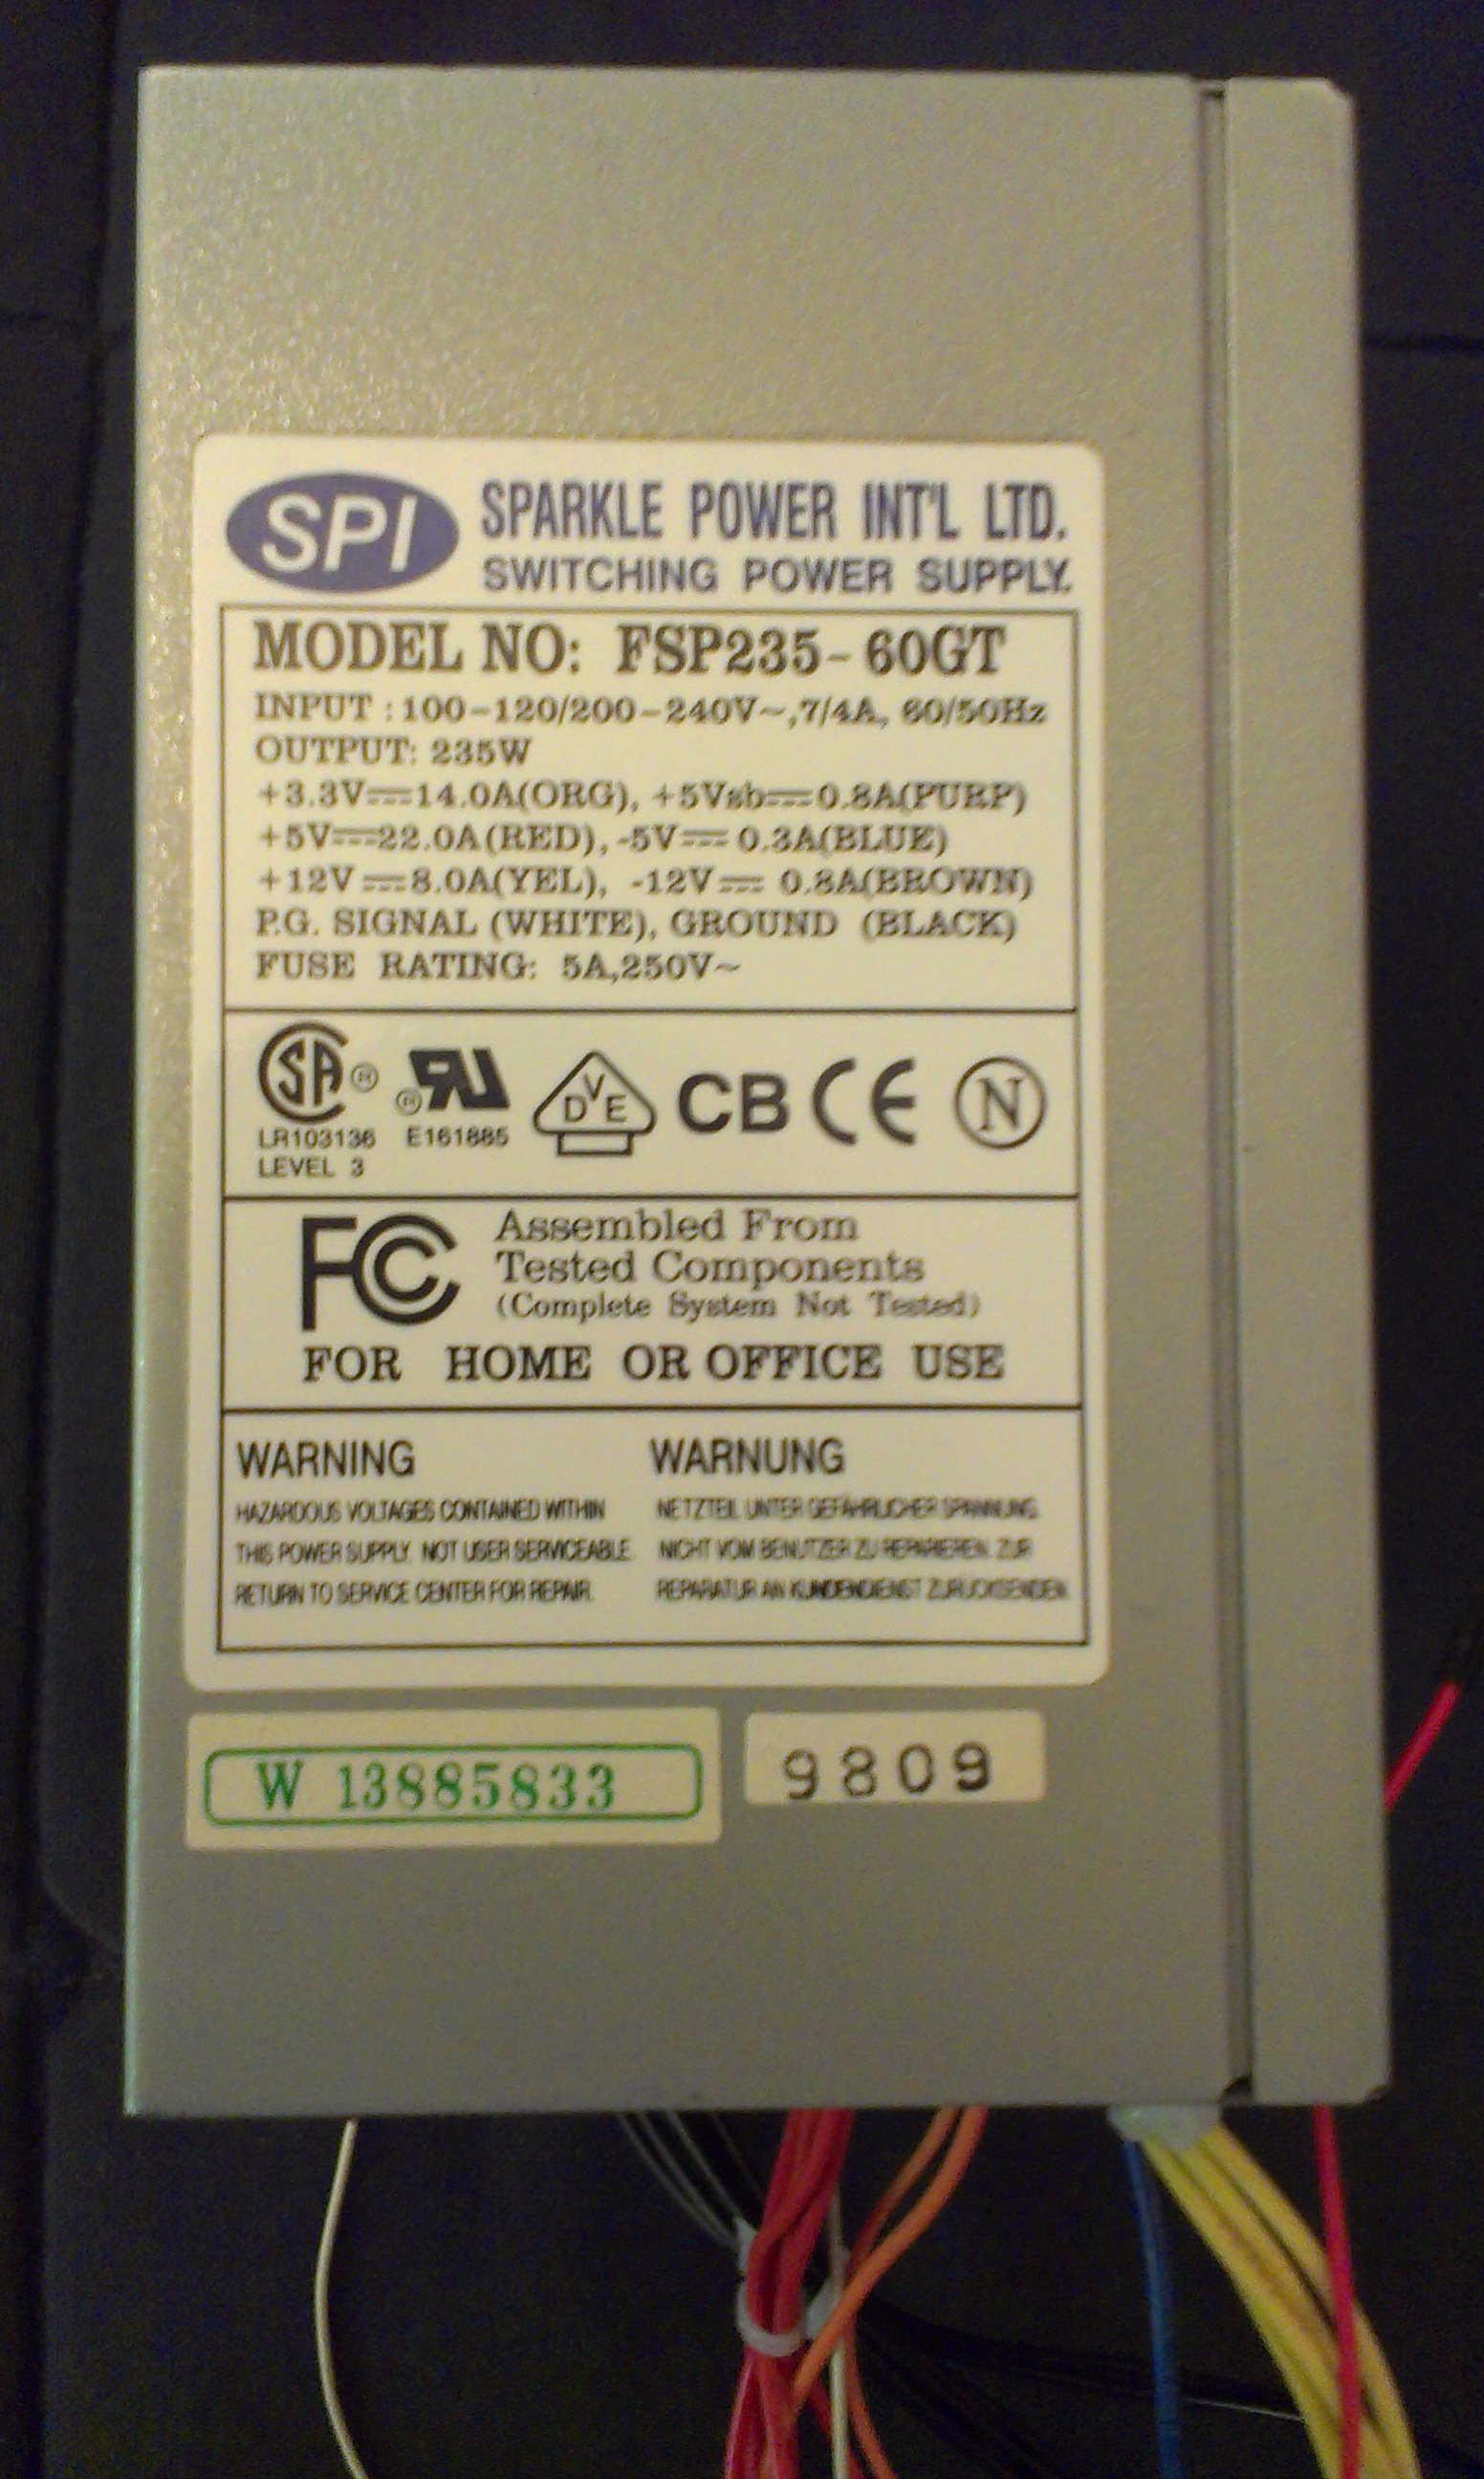 The label shower the power supplies specs. This is an older, weaker one.